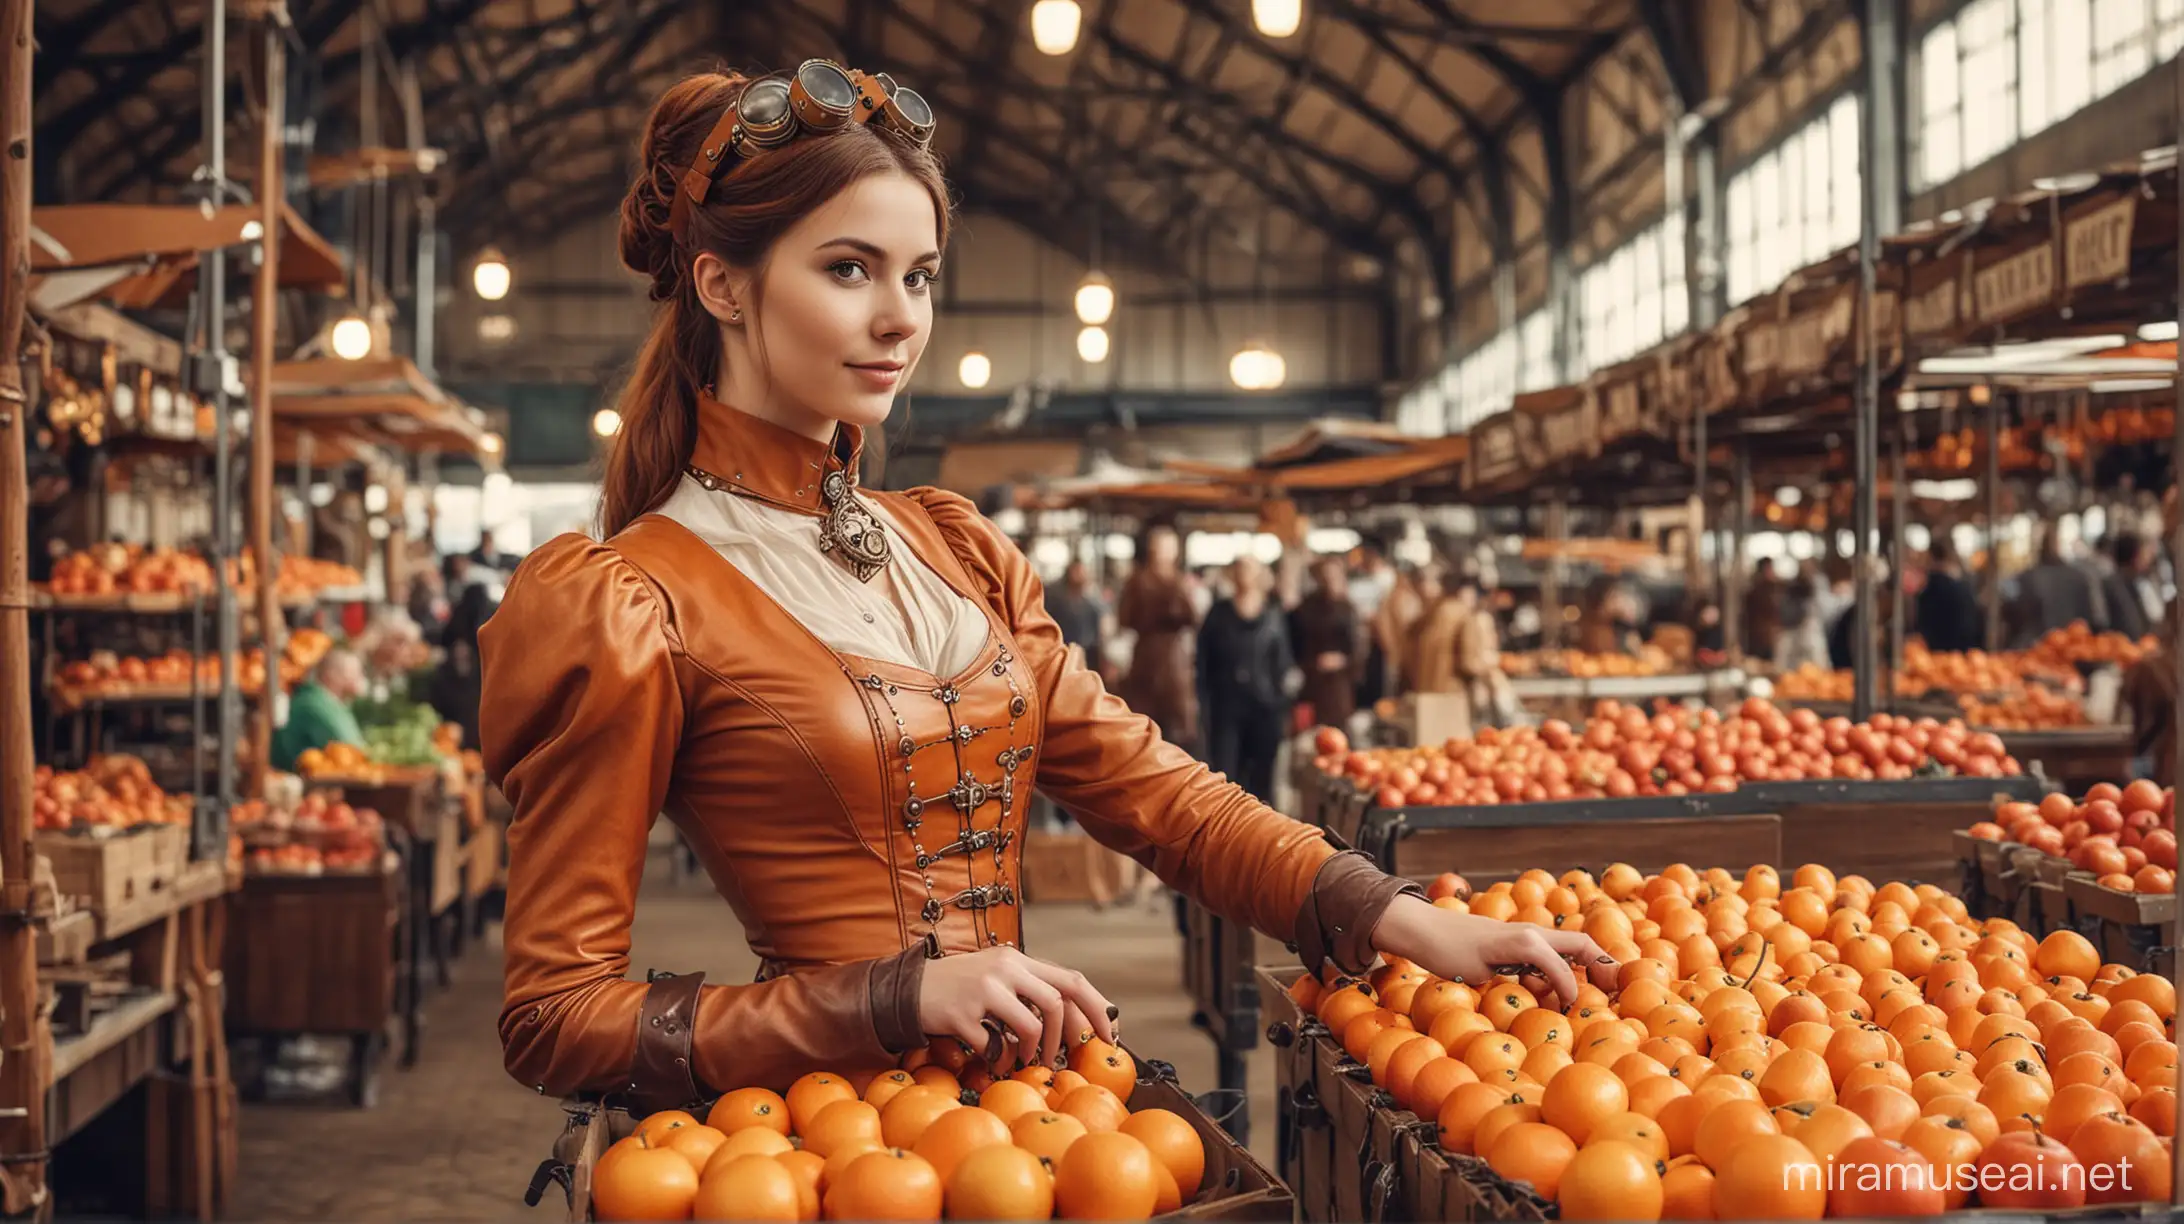 Steampunk Woman in Orange Leather Dress Buying Apples at Market Stall